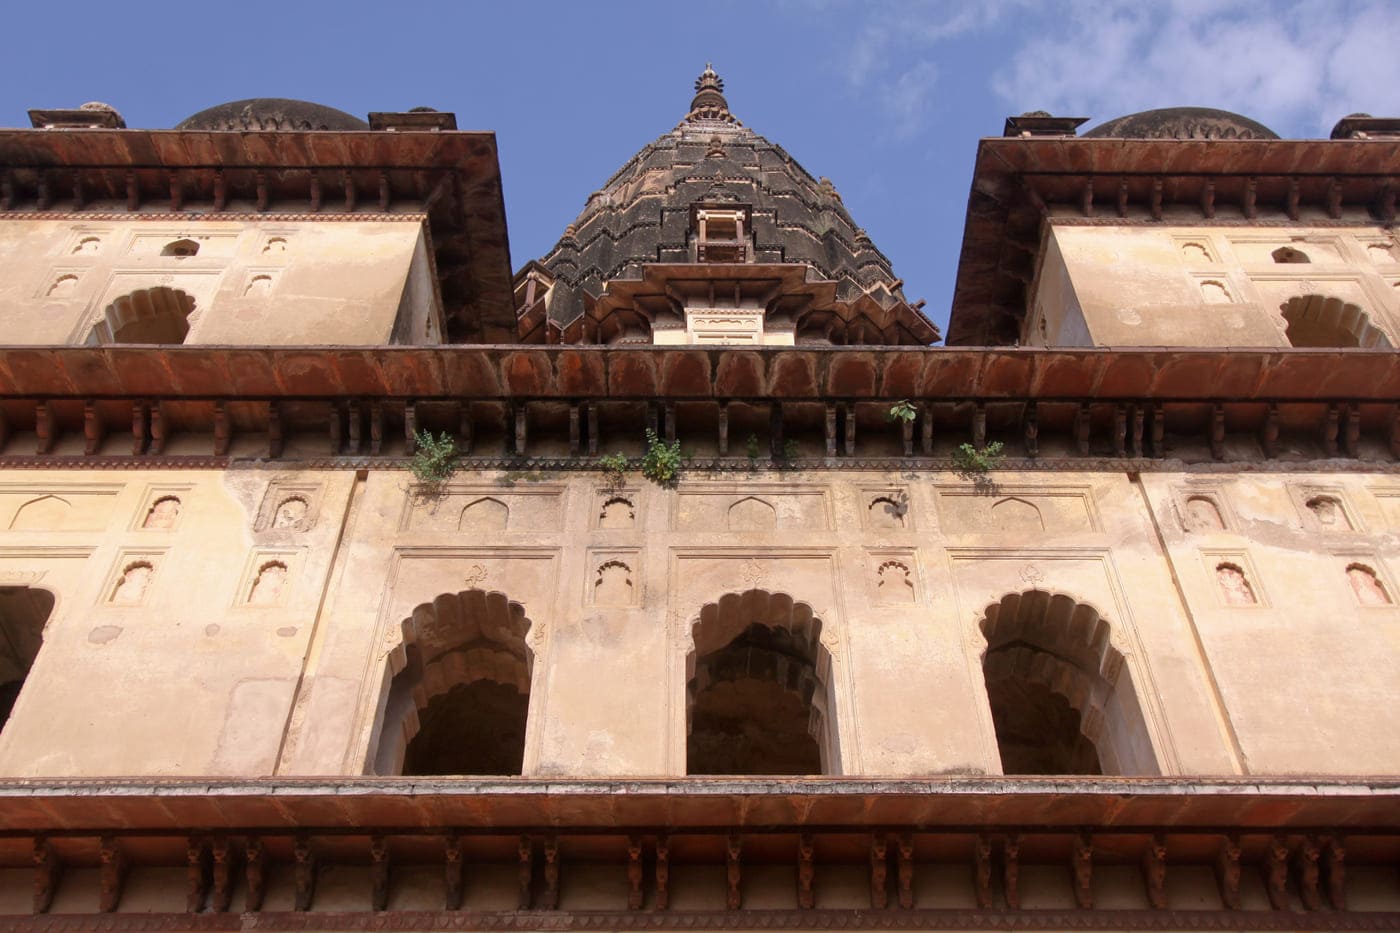 The sheer size of the ancient structures of Orchha, even in ruins, elucidates the magnitude of its once vibrant empire 